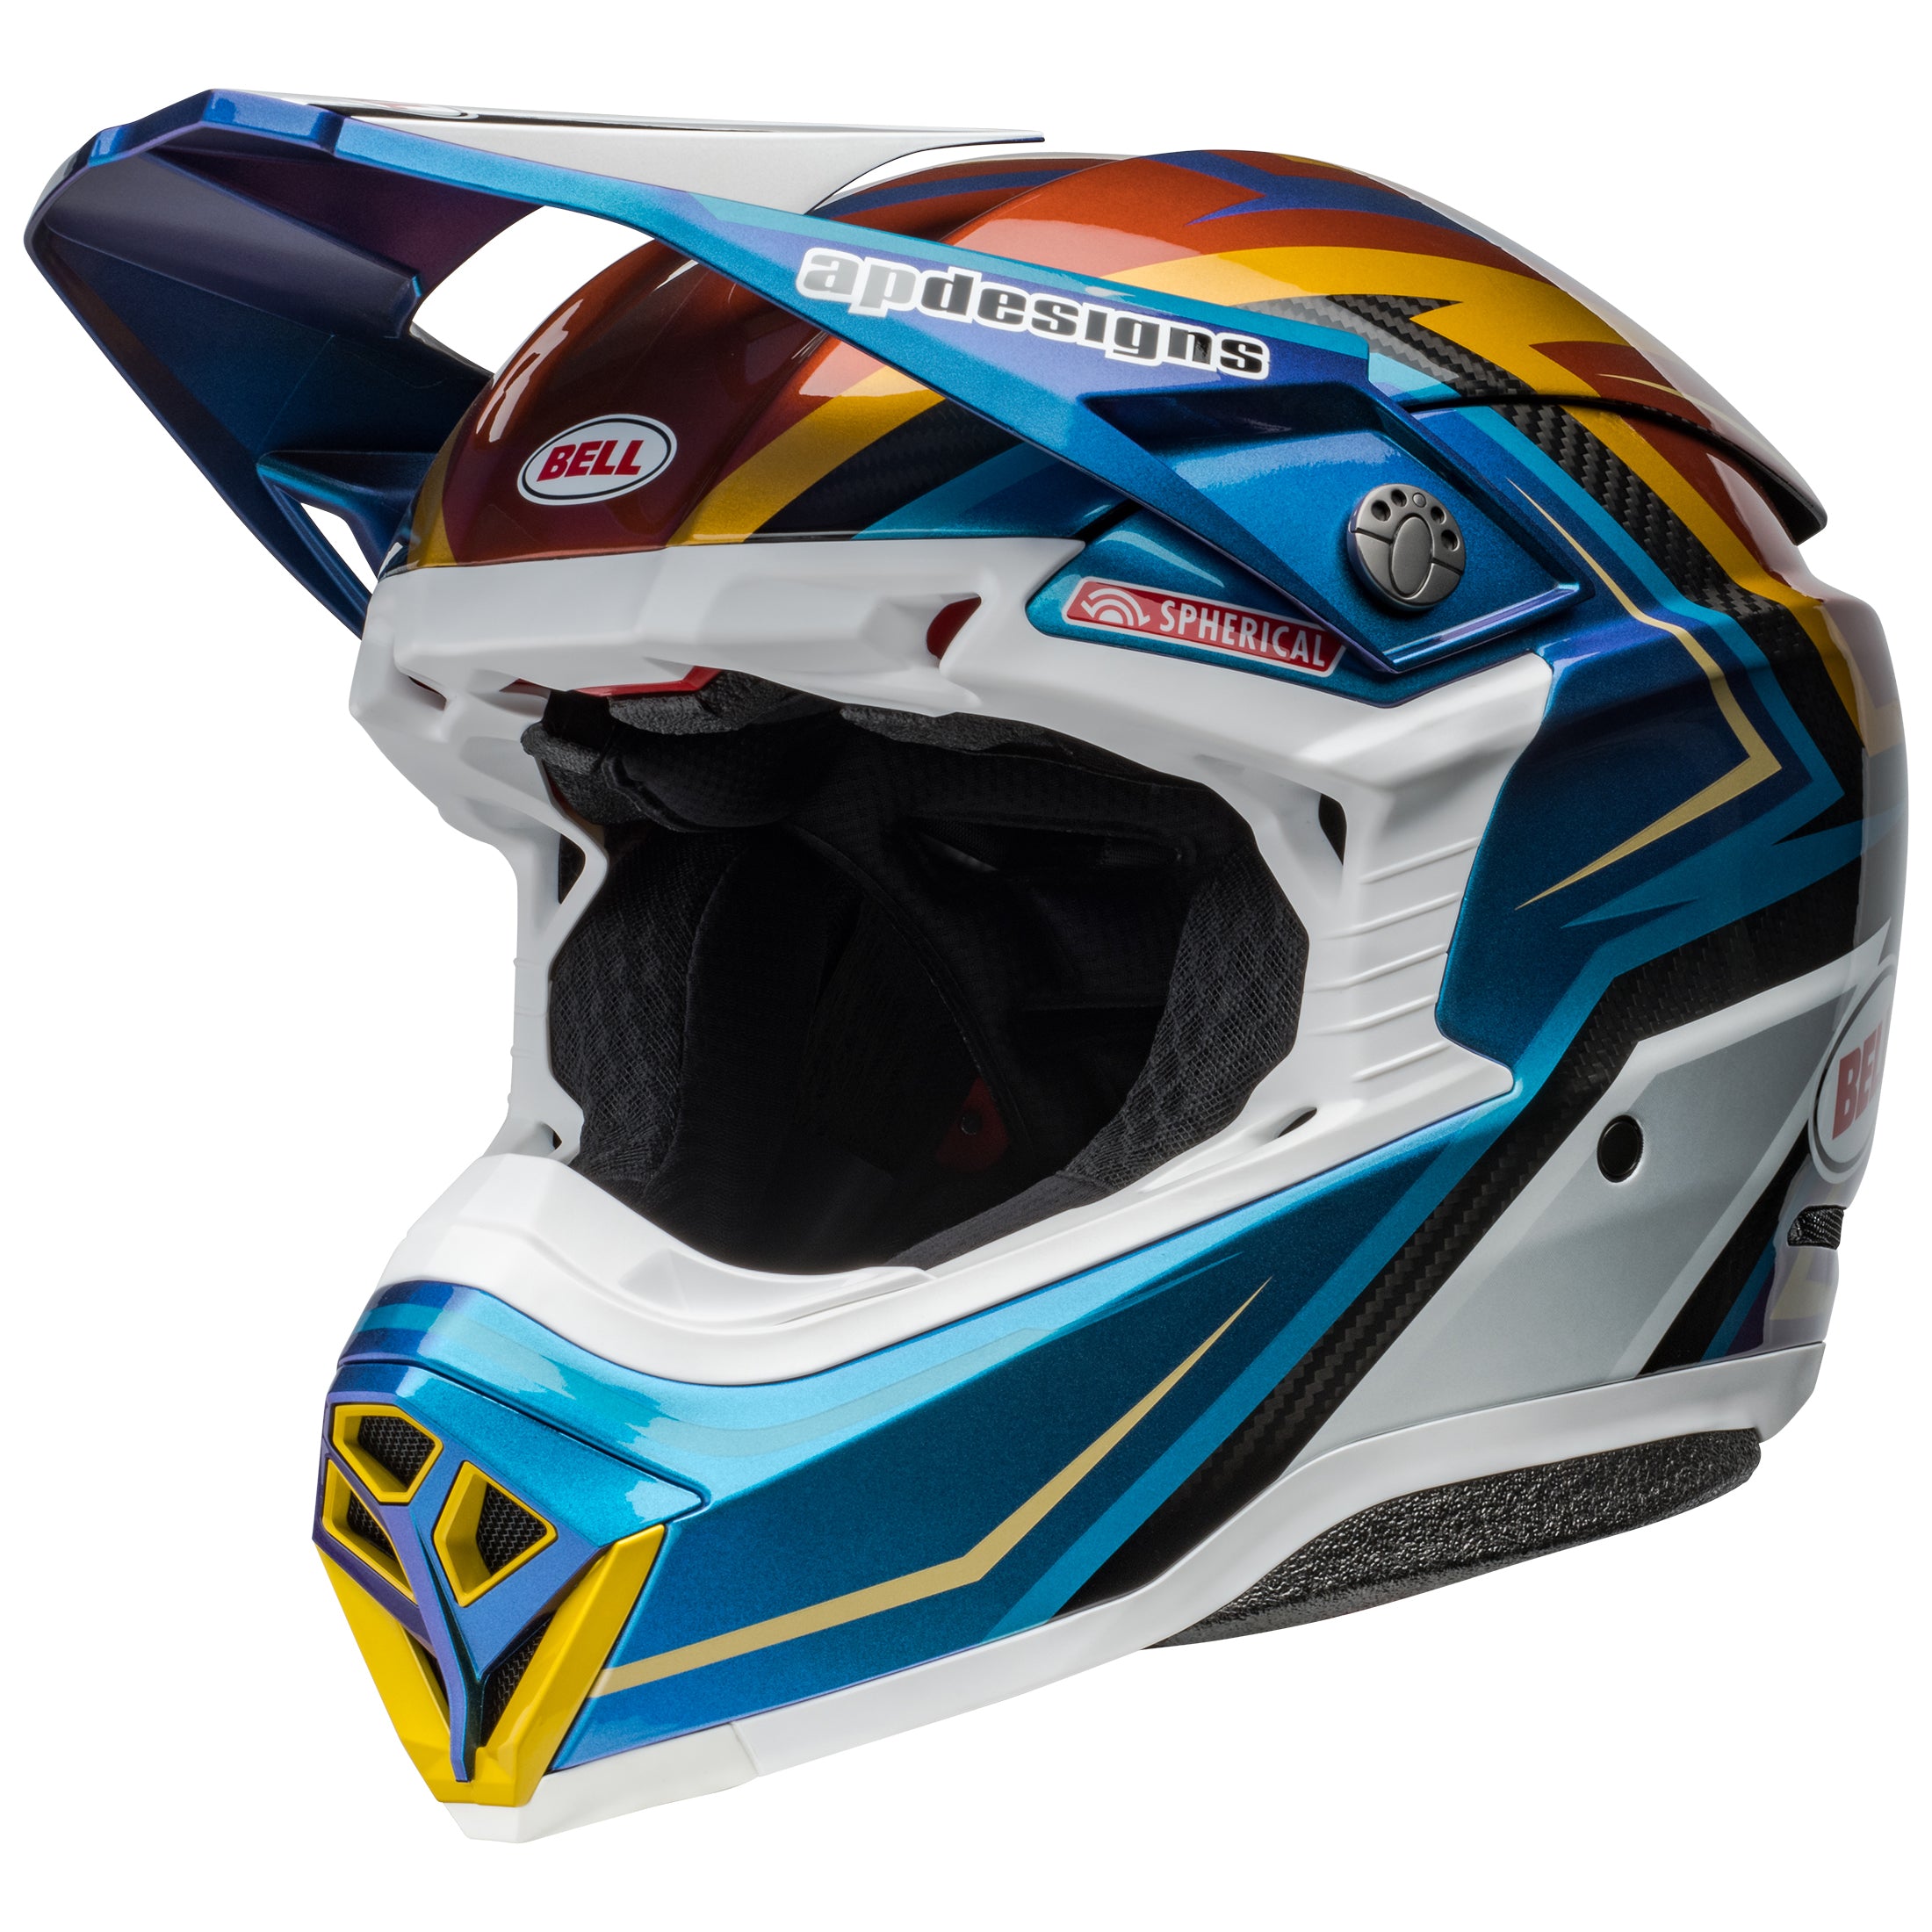 Bell MX 2024 Moto-10 Spherical Mips Adult Helmet in Tomac 24 White and Gold Design, ECE6 Certified